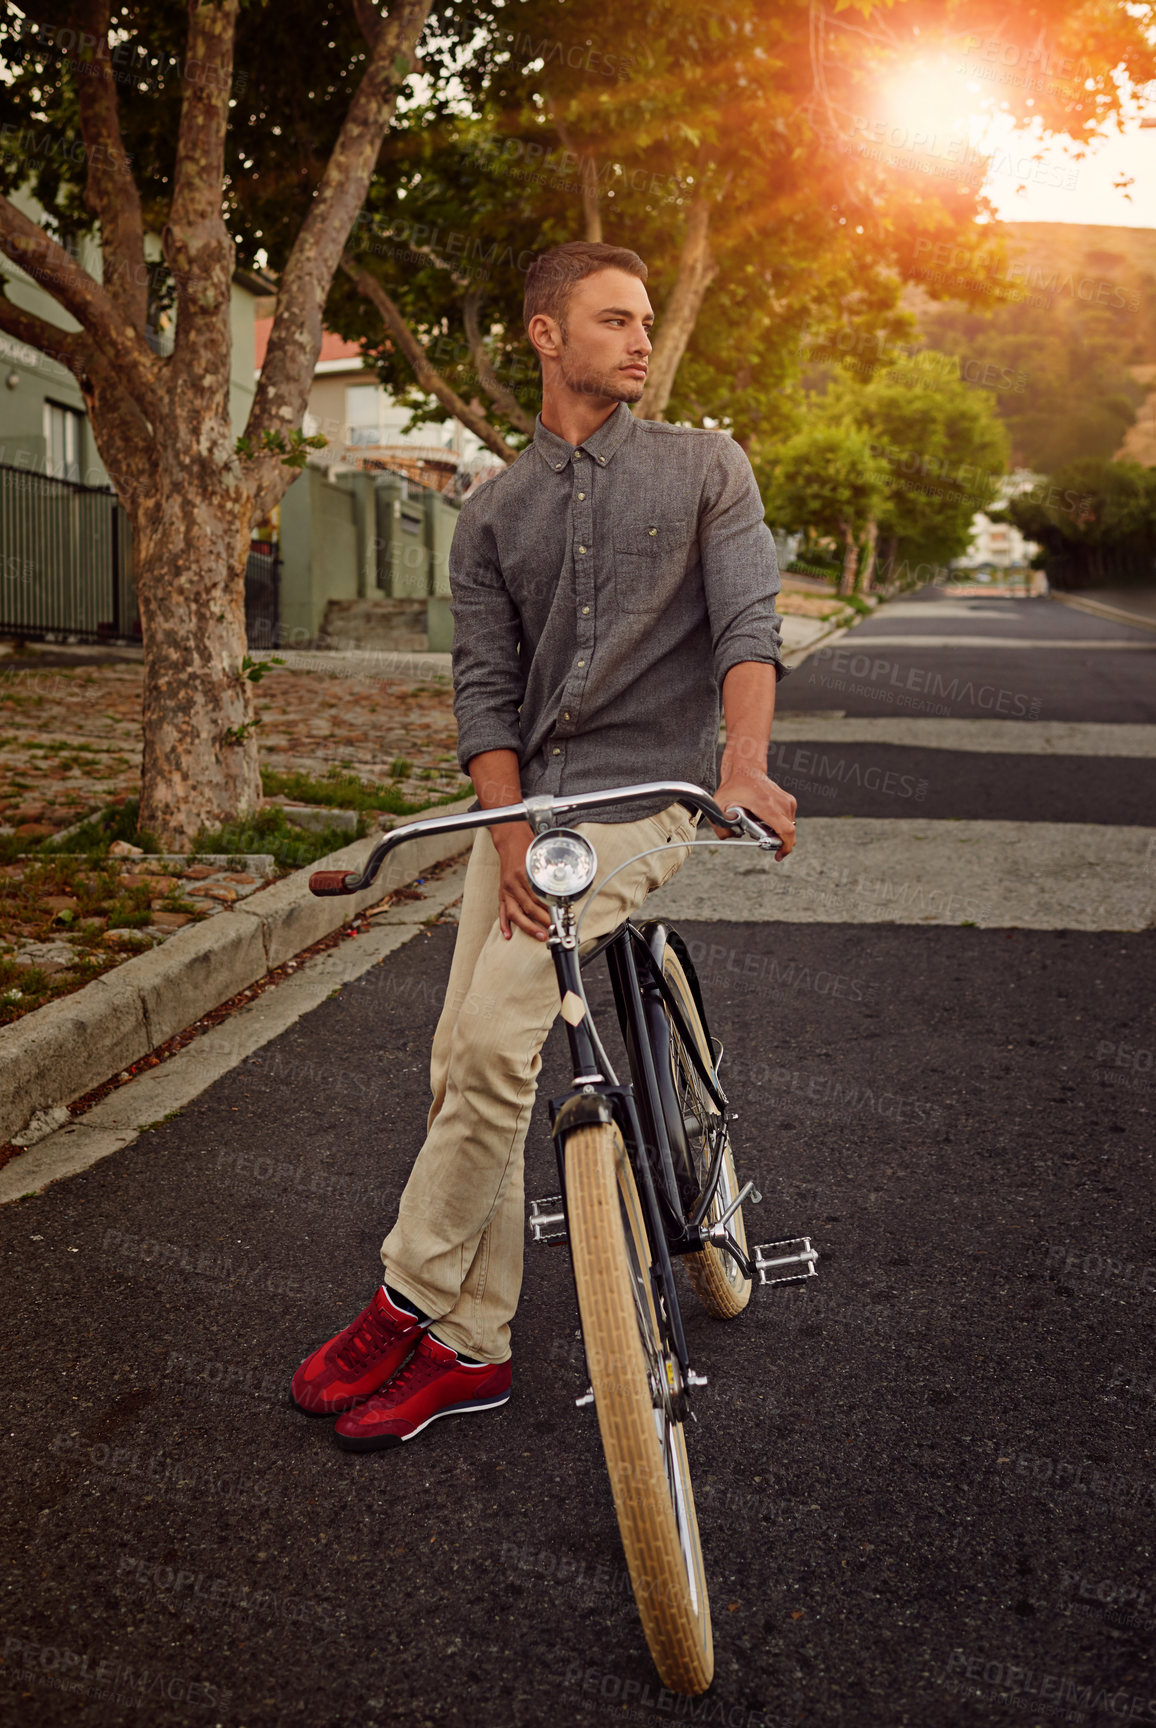 Buy stock photo A young man standing with his bicycle outdoors